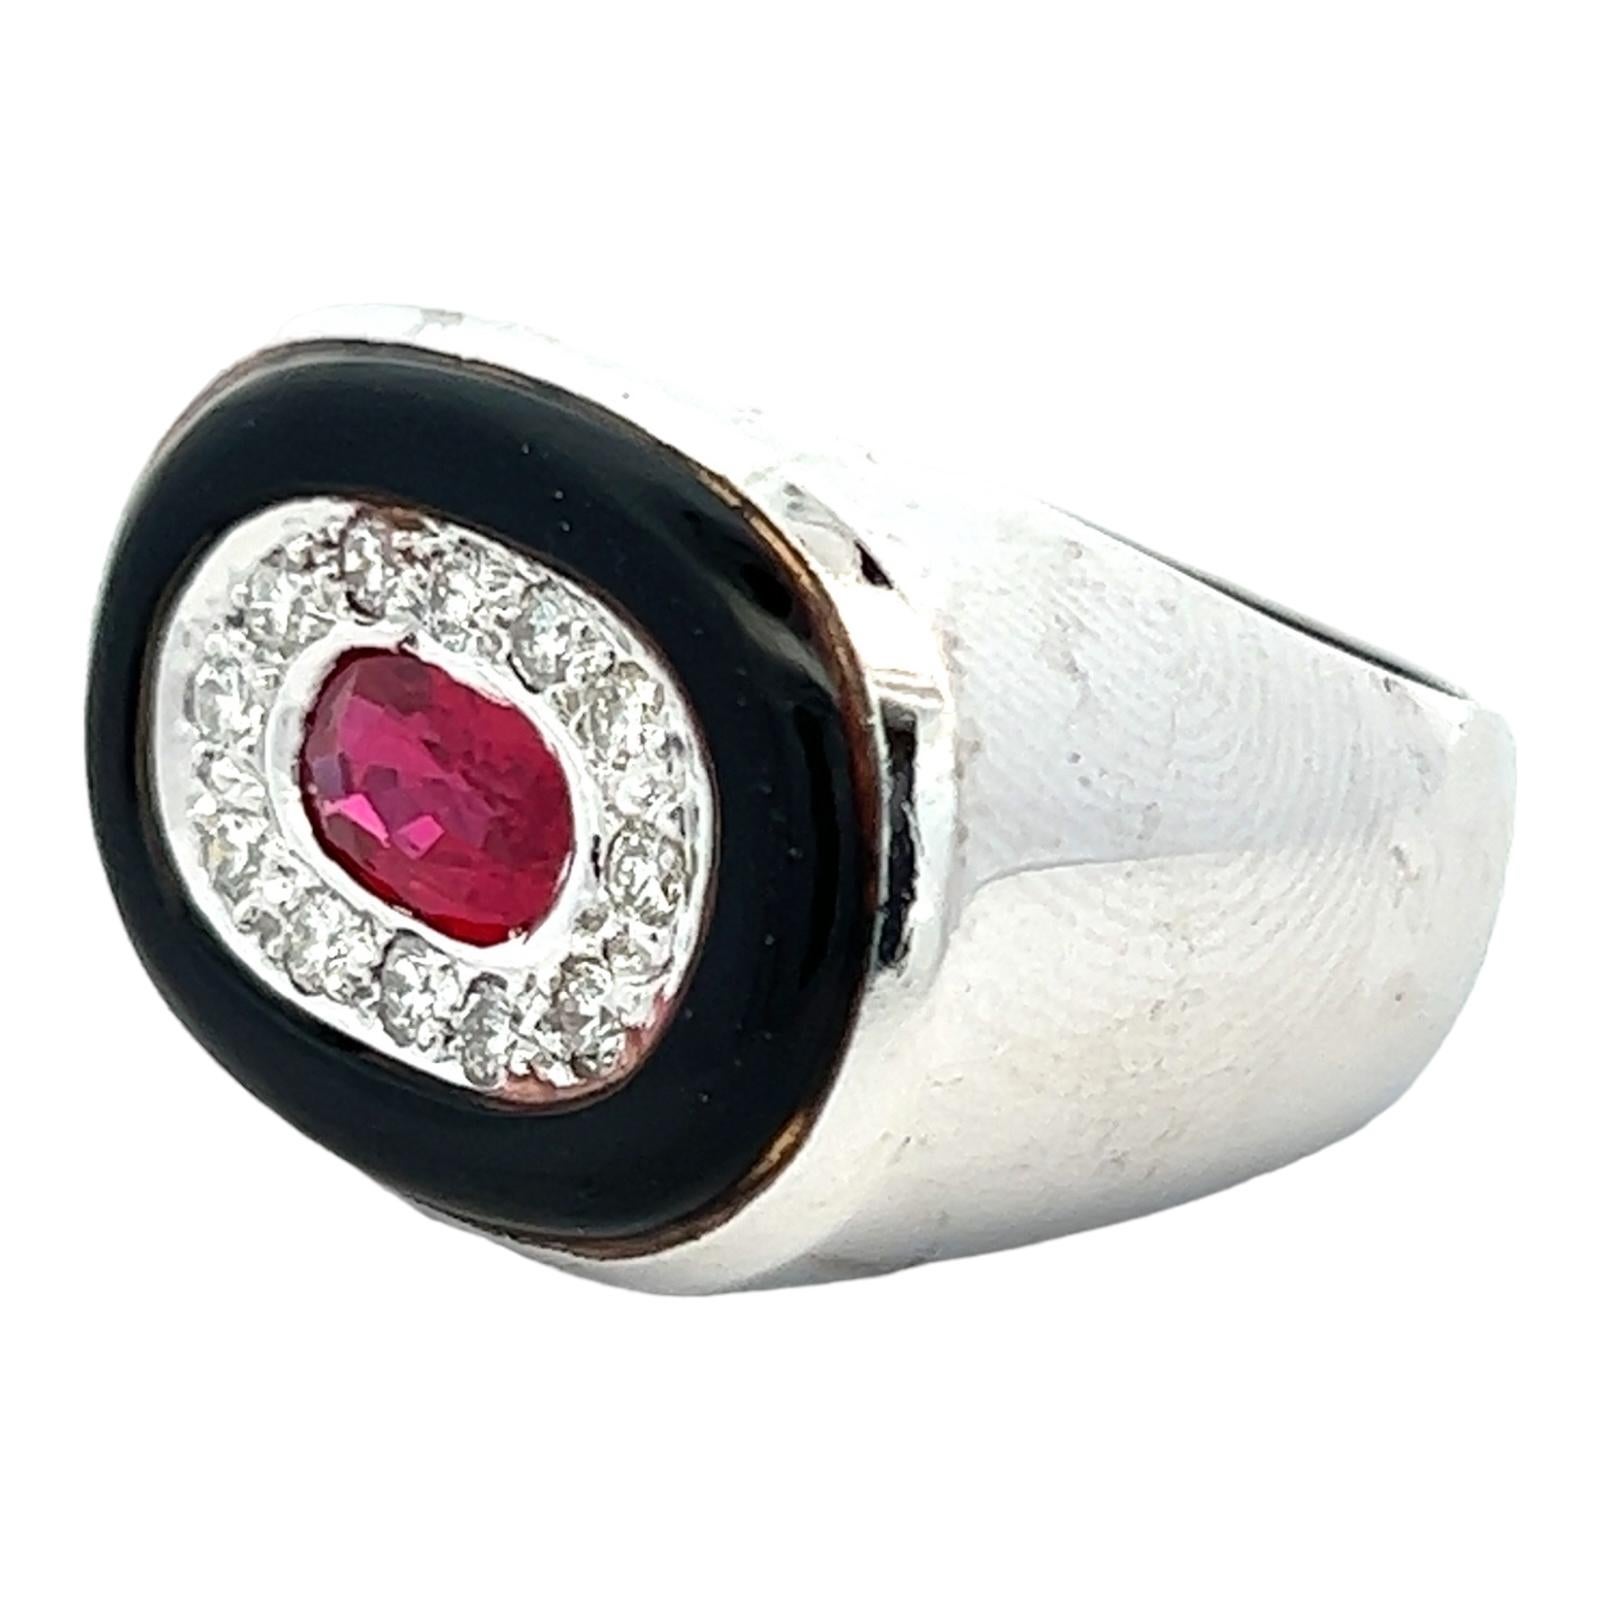 Beautiful diamond, ruby, and onyx cocktail ring handcrafted in 14 karat white gold. The center oval ruby gemstone weighs approximately 1.20 carat and is surrounded by 12 round briliant cut diamonds weighing approximately .36 CTW and black onyx